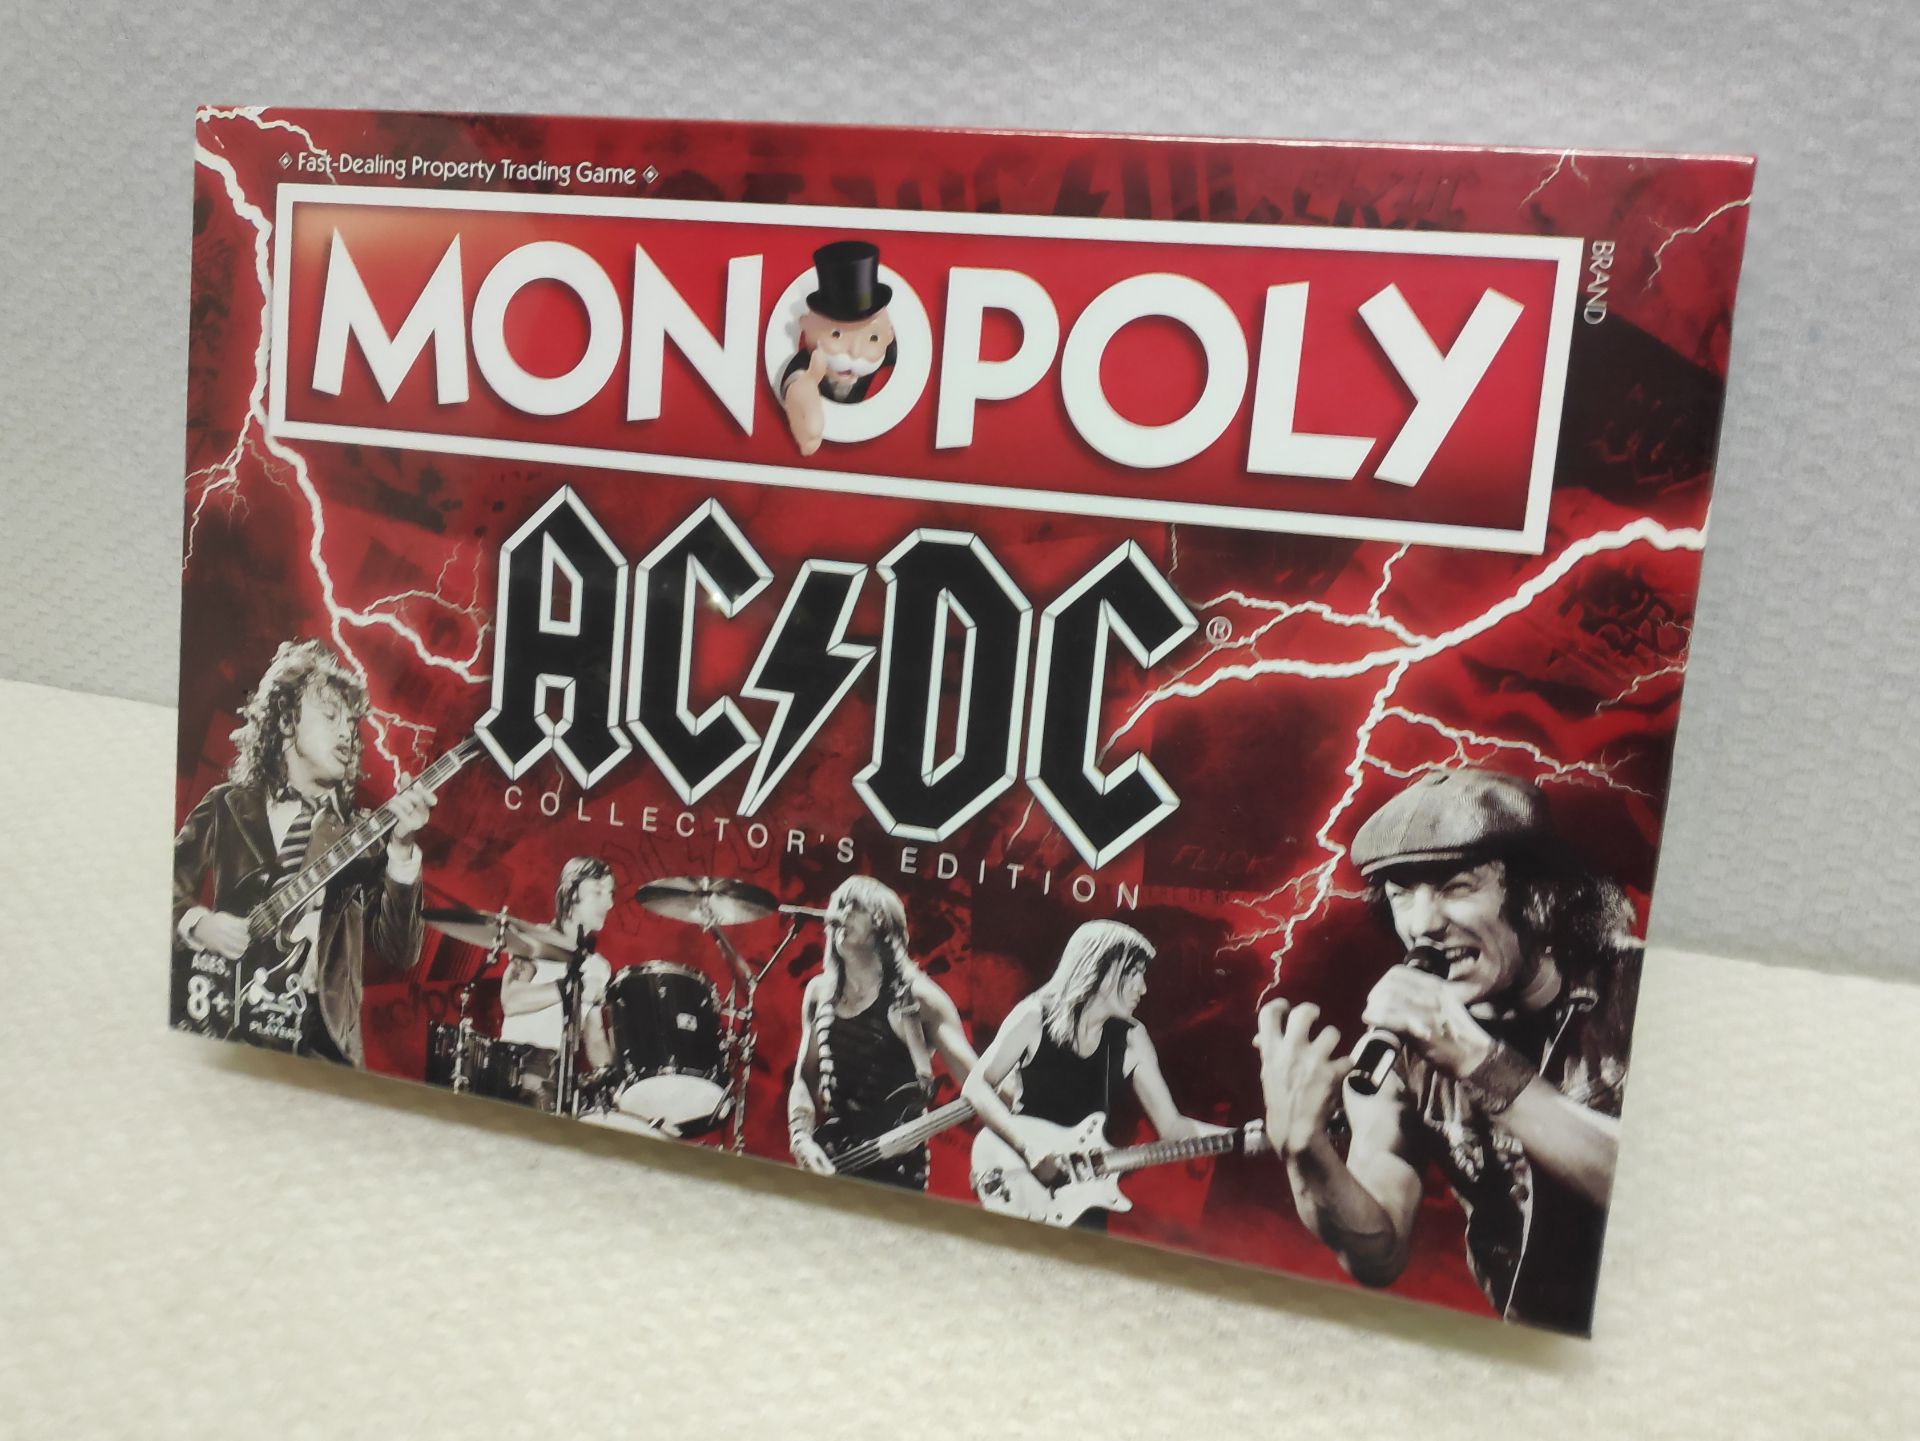 1 x AC/DC Collector's Edition Monopoly - New/Sealed - CL720 - Location: Altrincham WA14<BR - Image 5 of 8